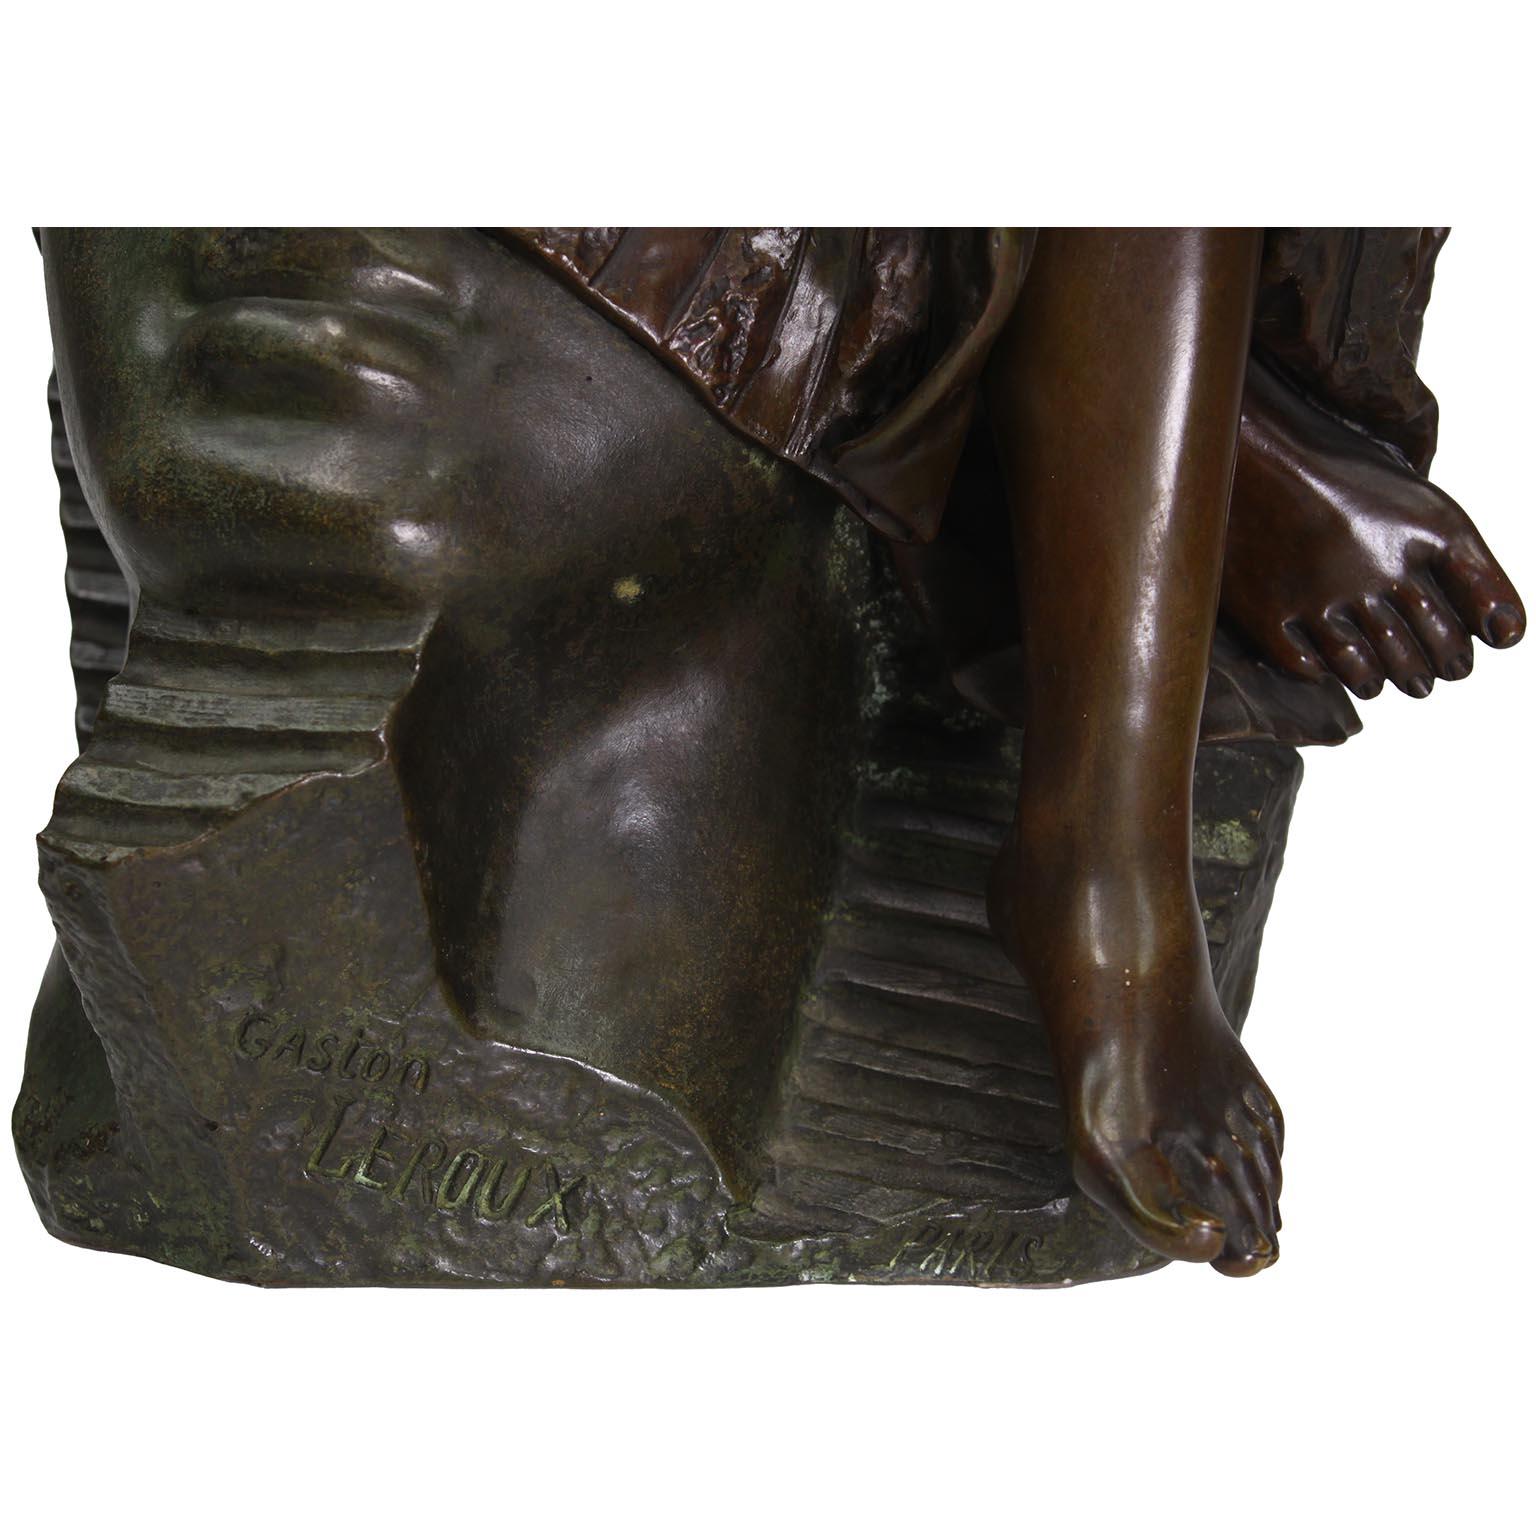 Gaston Leroux Bronze Figure of Aida on a Sphinx, French, 19th Century For Sale 10